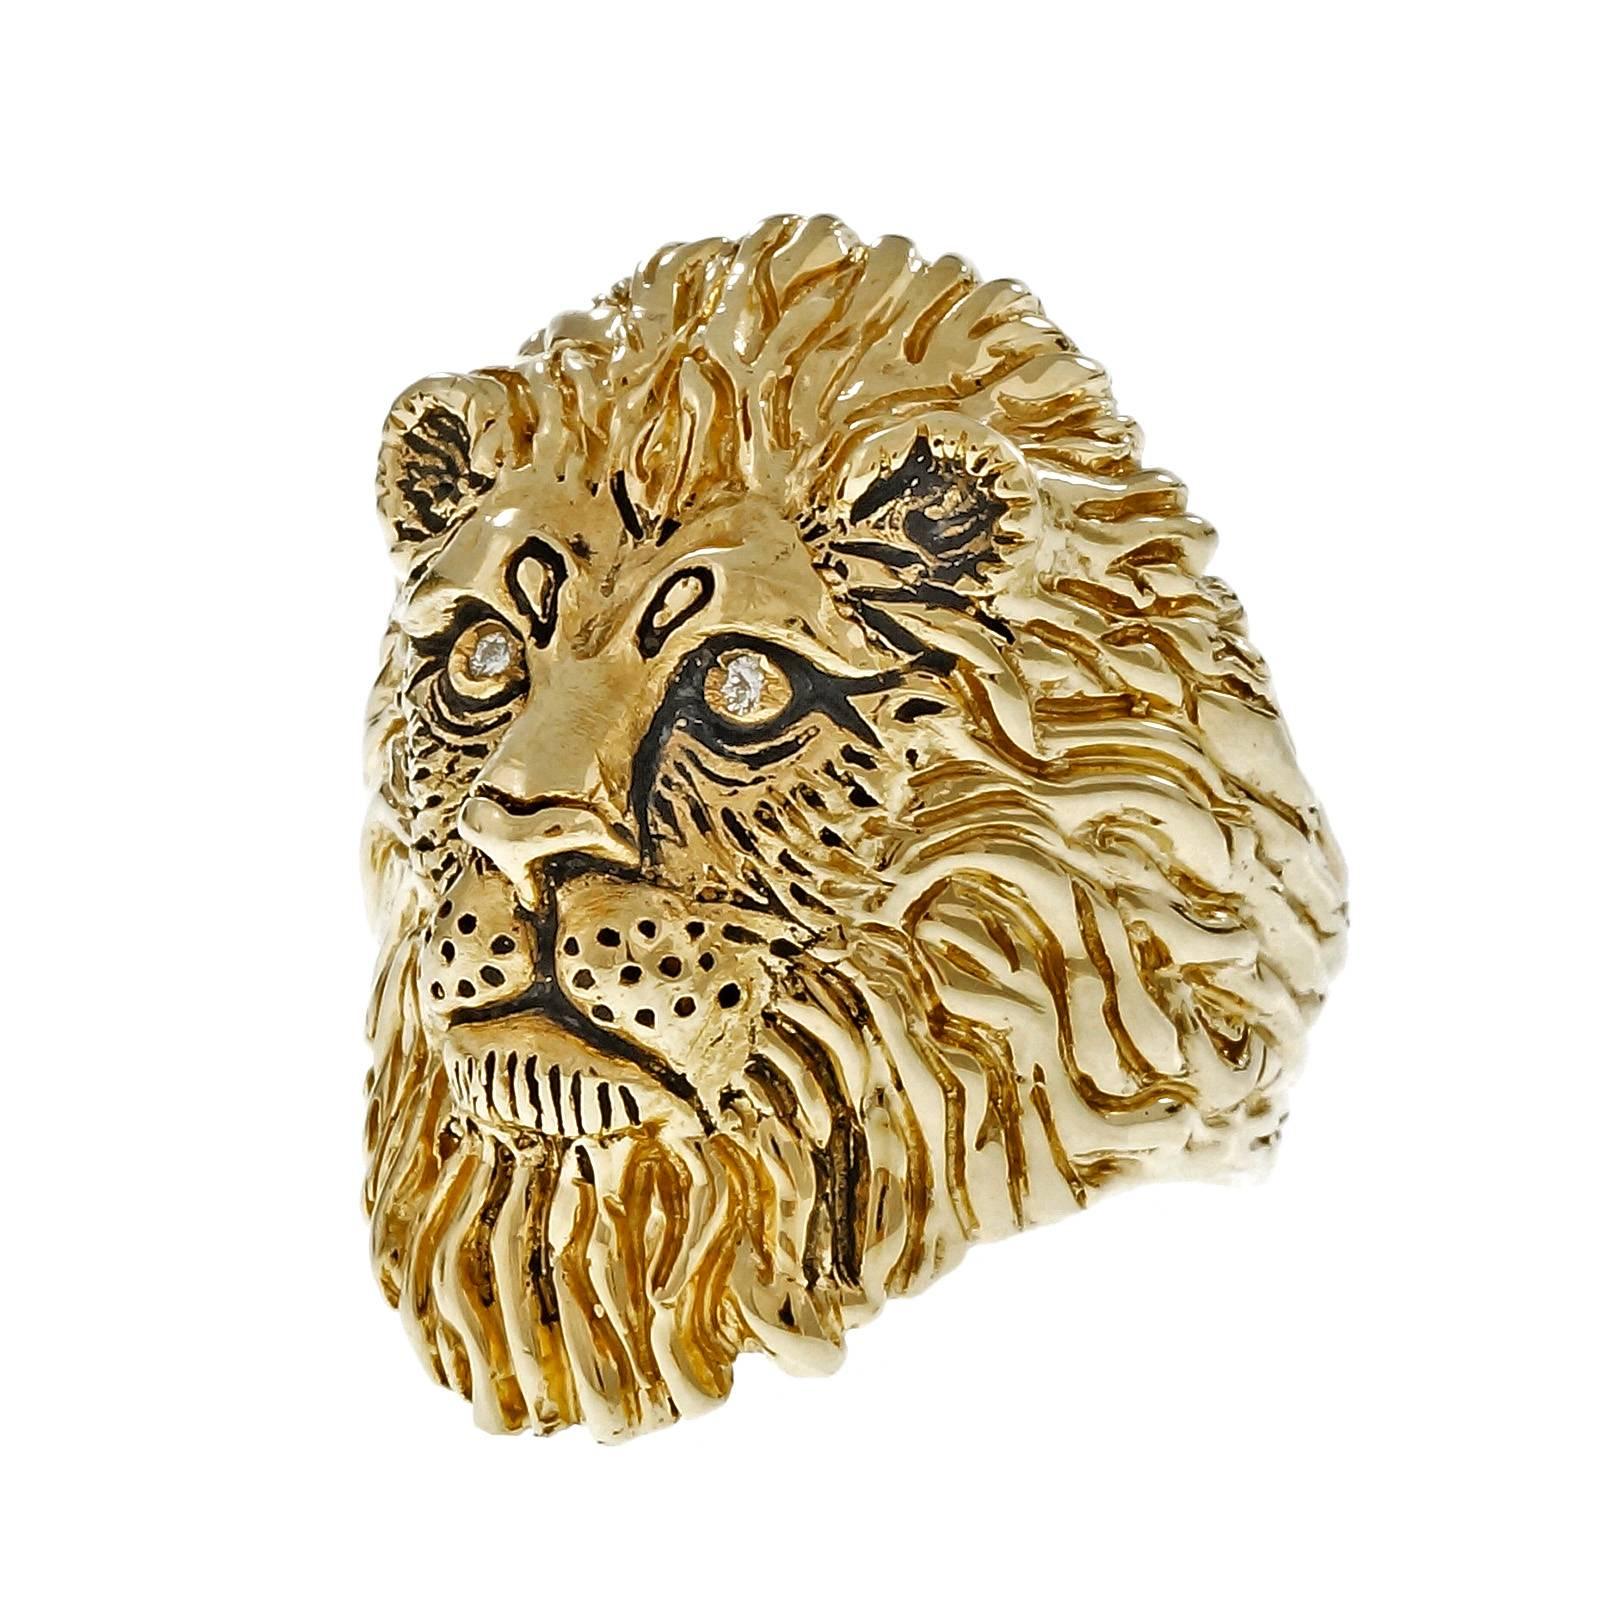 Gregory Appleby lion ring #1/100 in 14k yellow gold with diamond eyes. Circa 1994.

2 round diamonds, approx. total weight .04cts, G – H, VS
14k yellow gold
16.5 grams
Tested and stamped: 14k
Hallmark: © 1994 g Appleby 9p 1/100
Width at top: